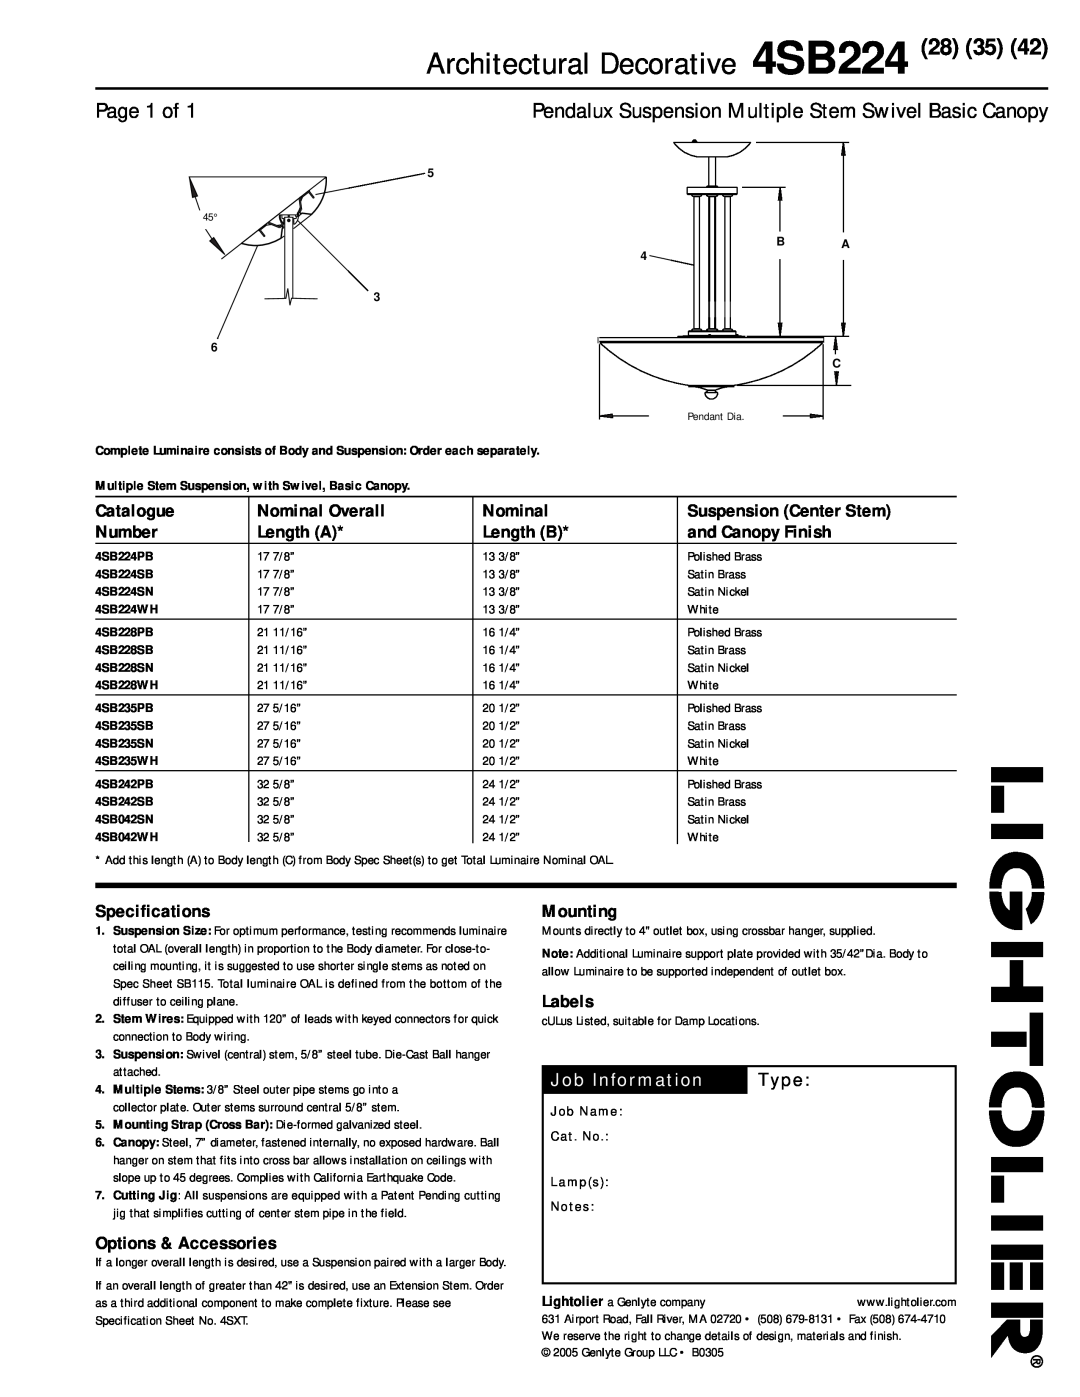 Lightolier specifications Architectural Decorative 4SB224, Page 1 of 